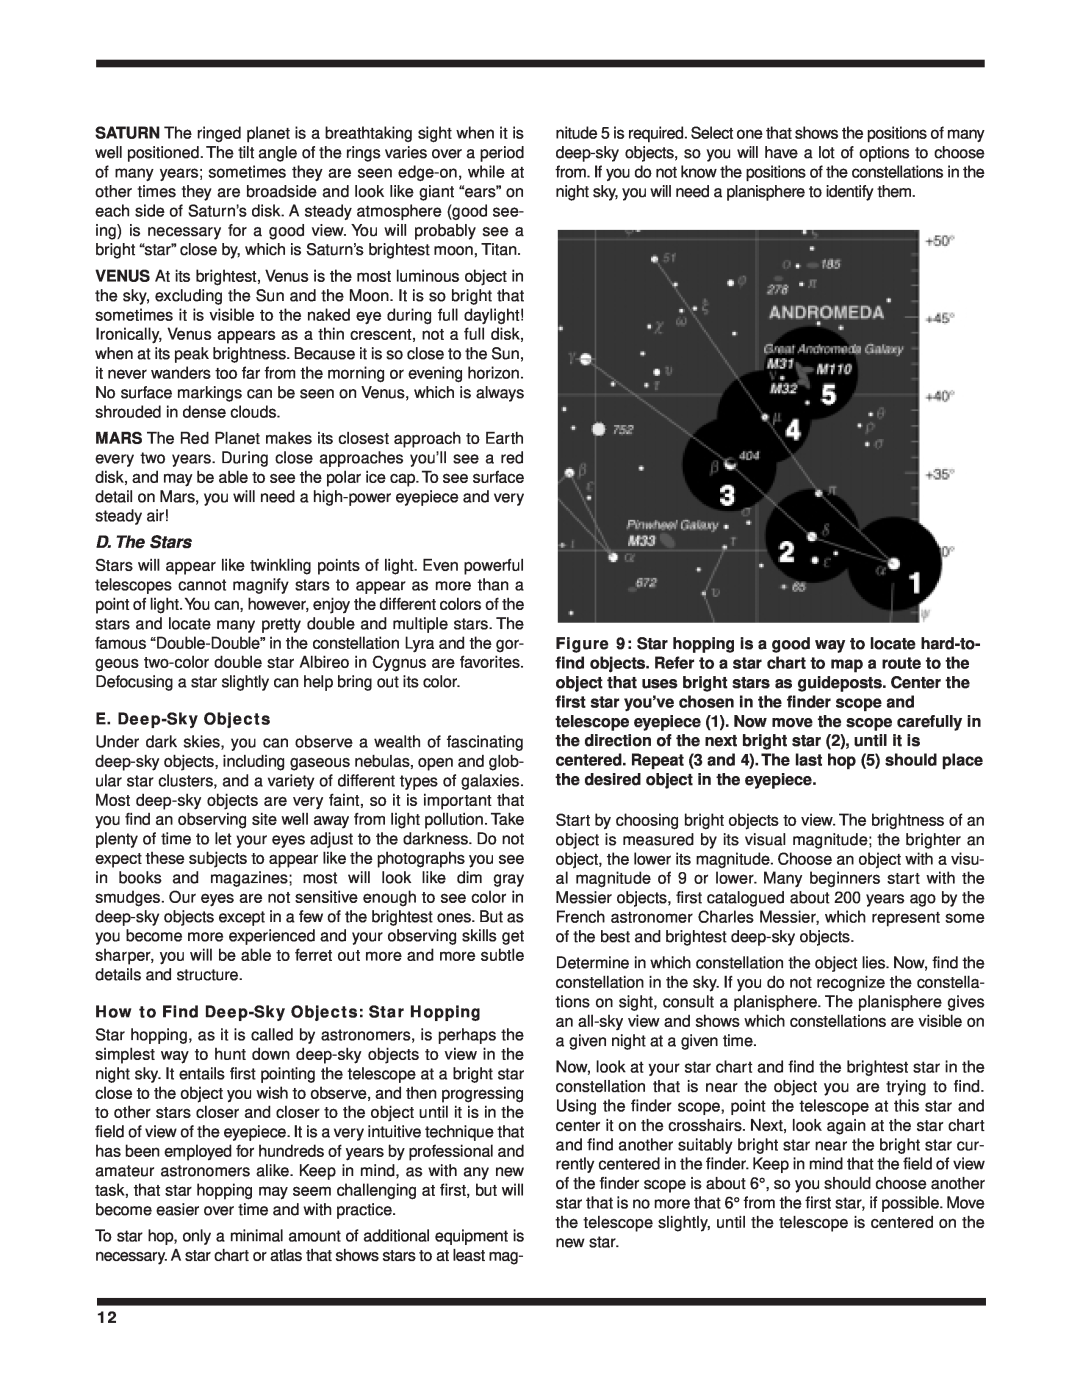 Orion 102mm EQ instruction manual D. The Stars, E. Deep-Sky Objects, How to Find Deep-Sky Objects Star Hopping 